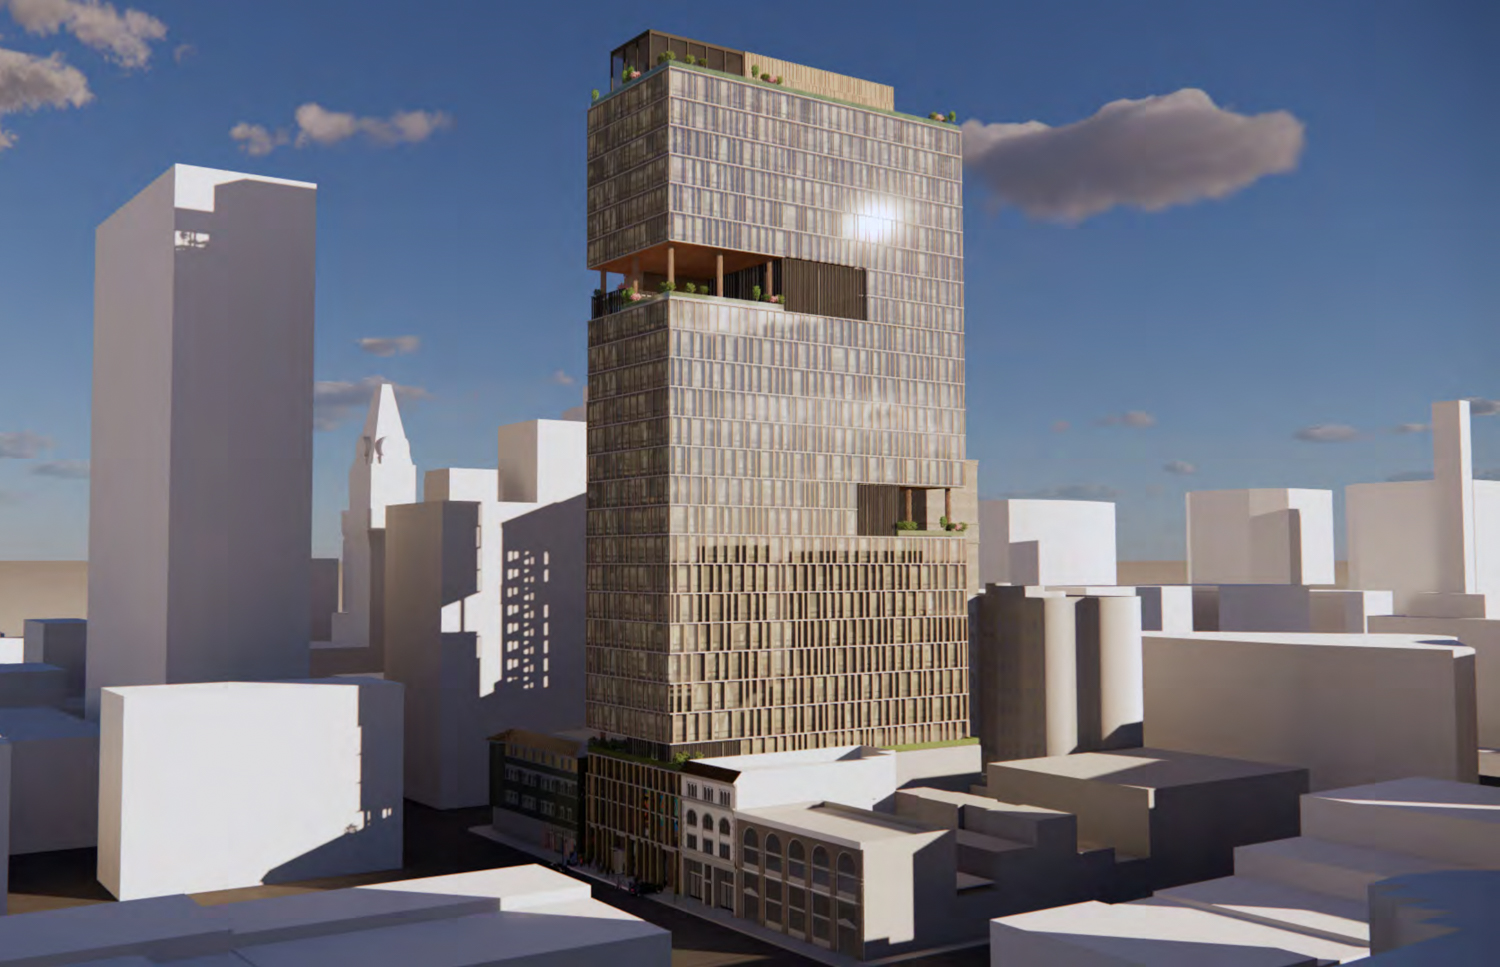 1431 Franklin Street office proposal, rendering by LARGE Architecture